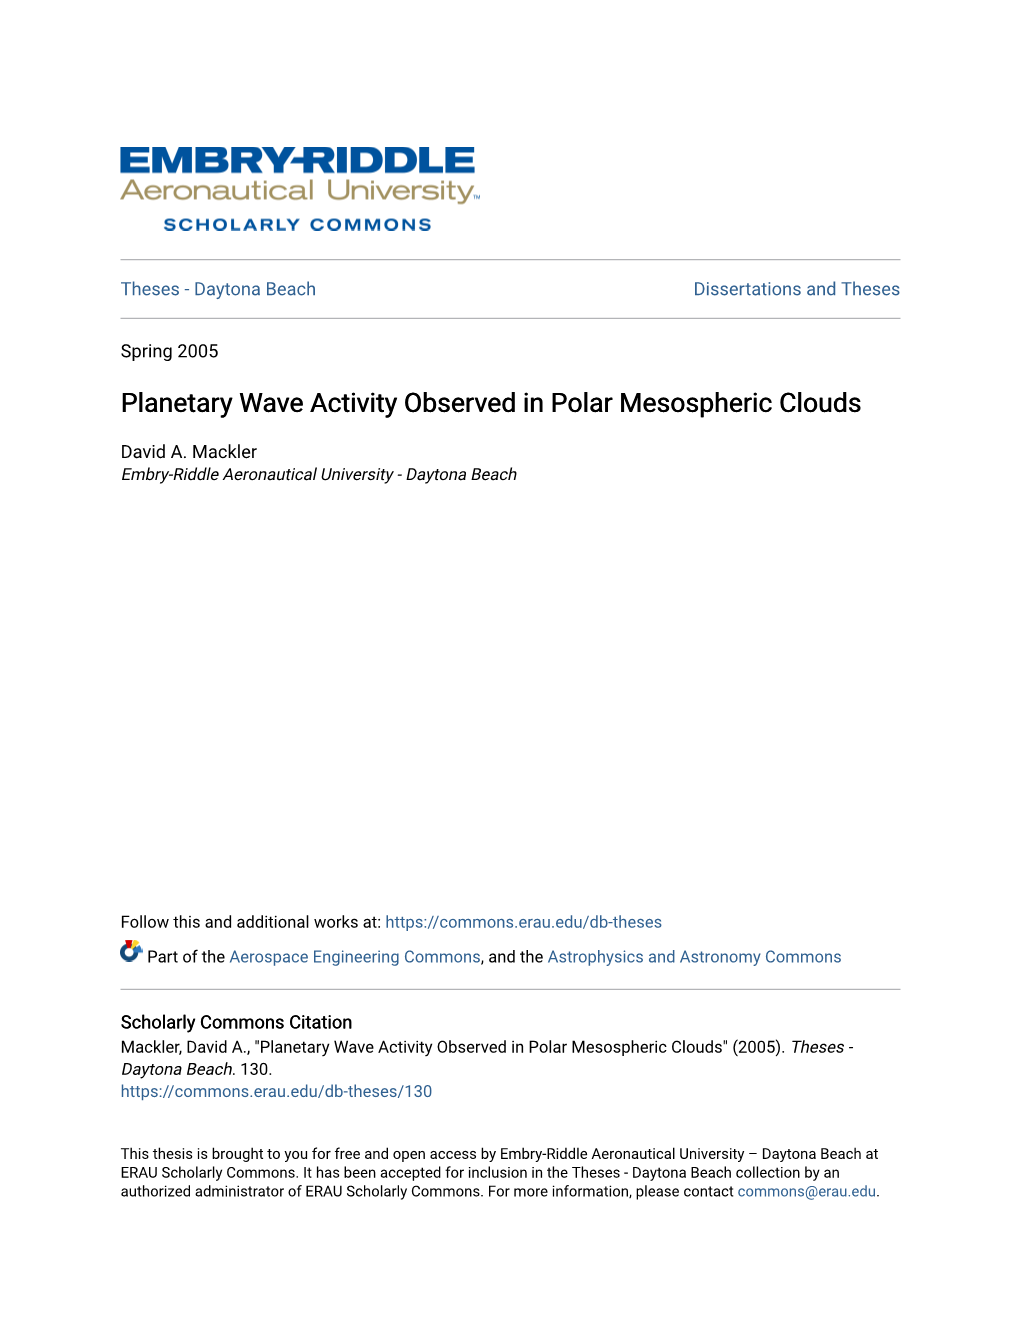 Planetary Wave Activity Observed in Polar Mesospheric Clouds